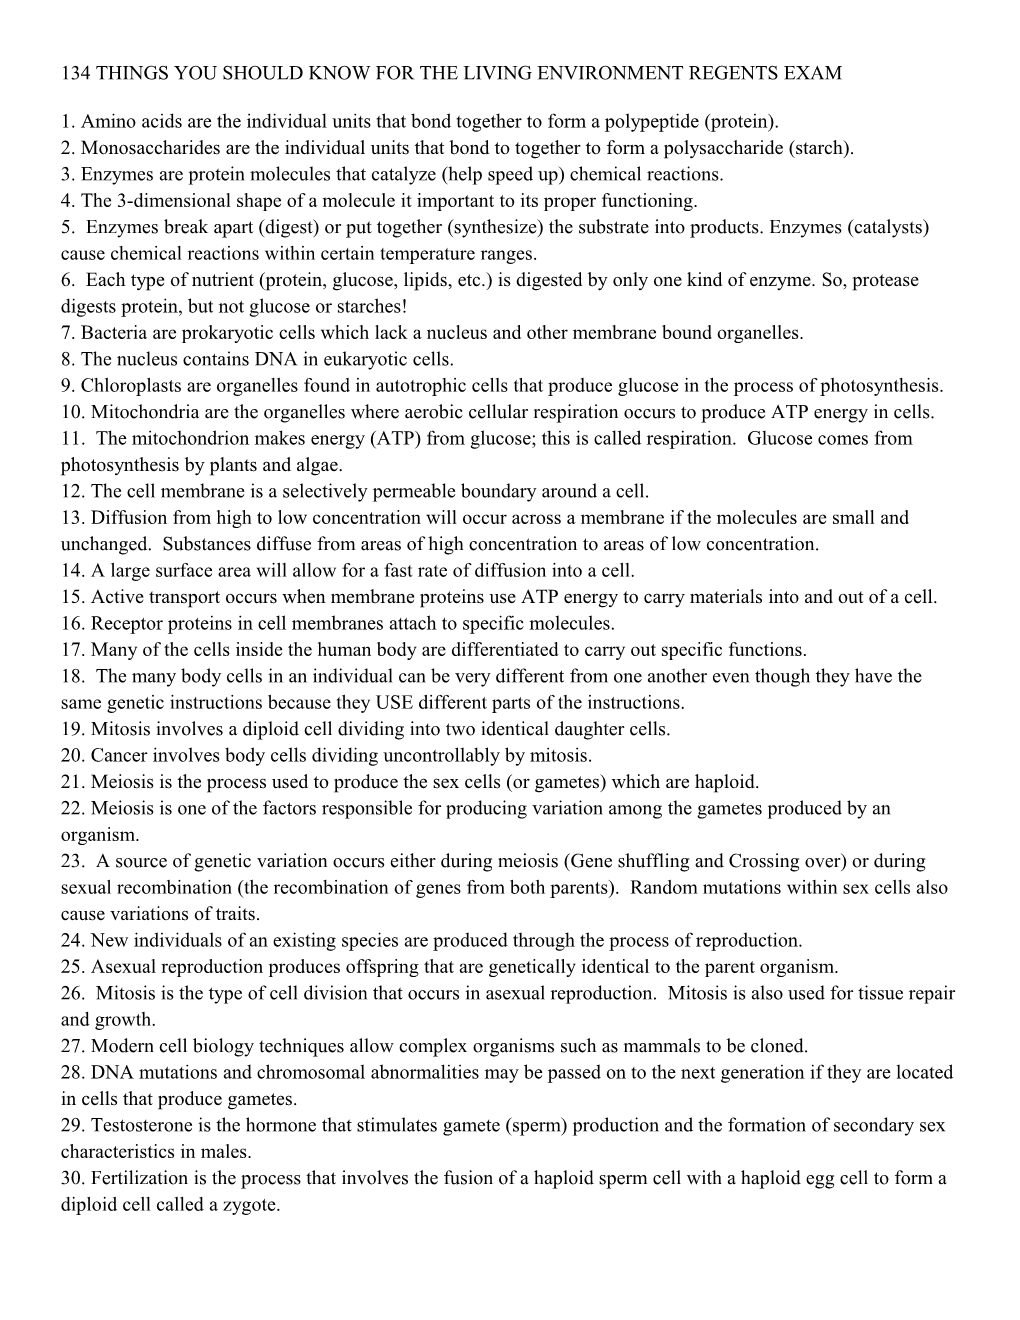 115 Things You Should Know for the Living Environment Regents Exam